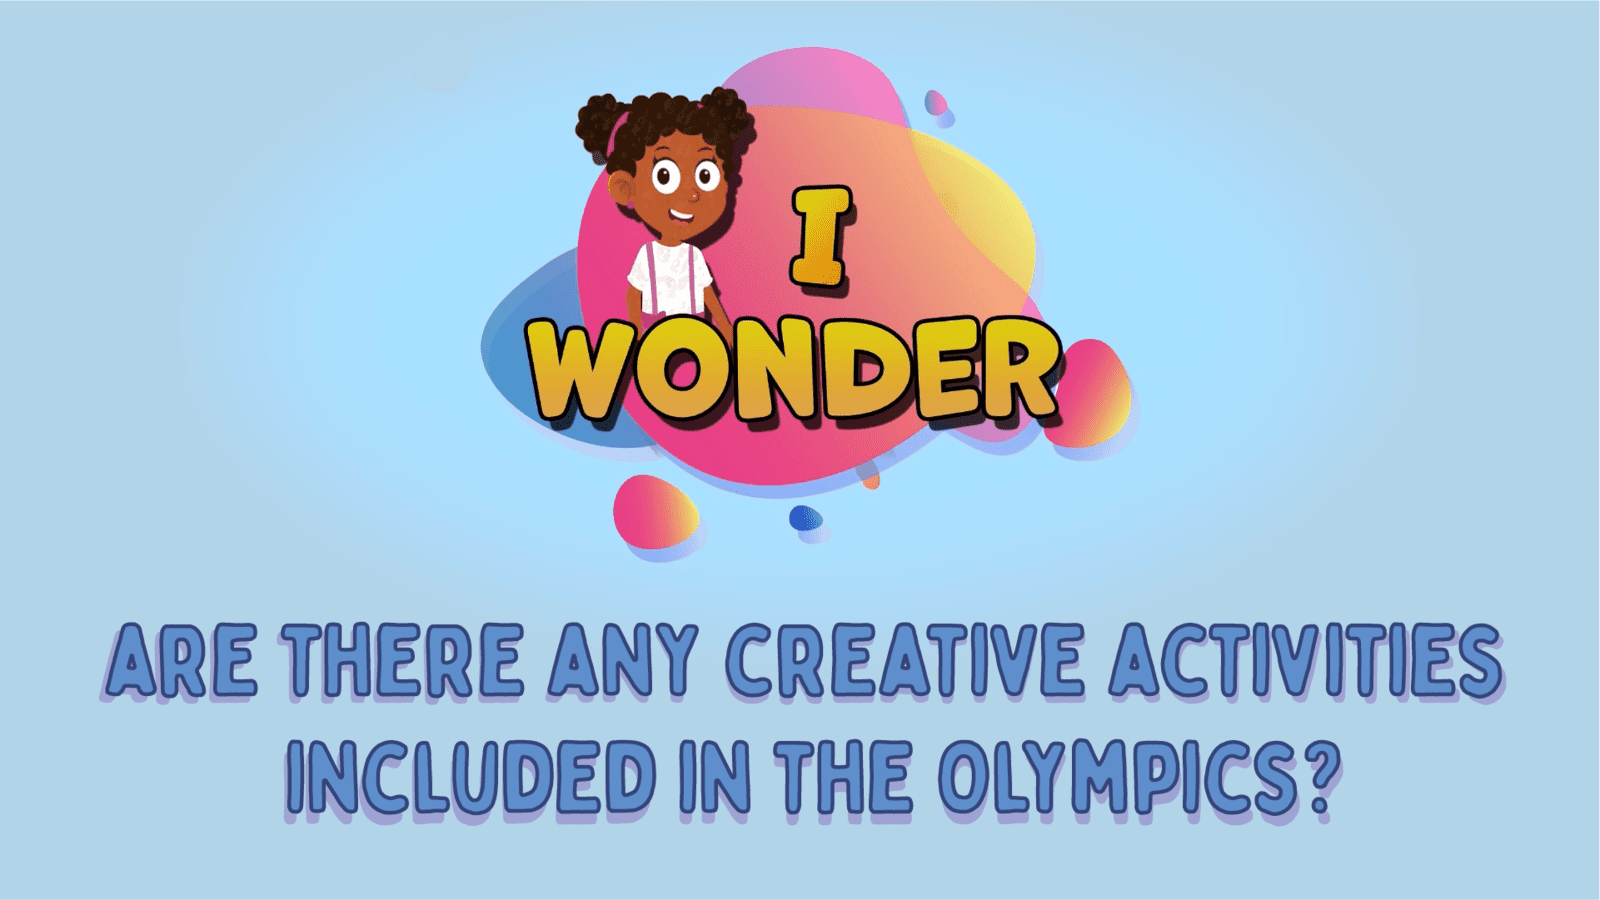 Are There Any Creative Activities Included In The Olympics?